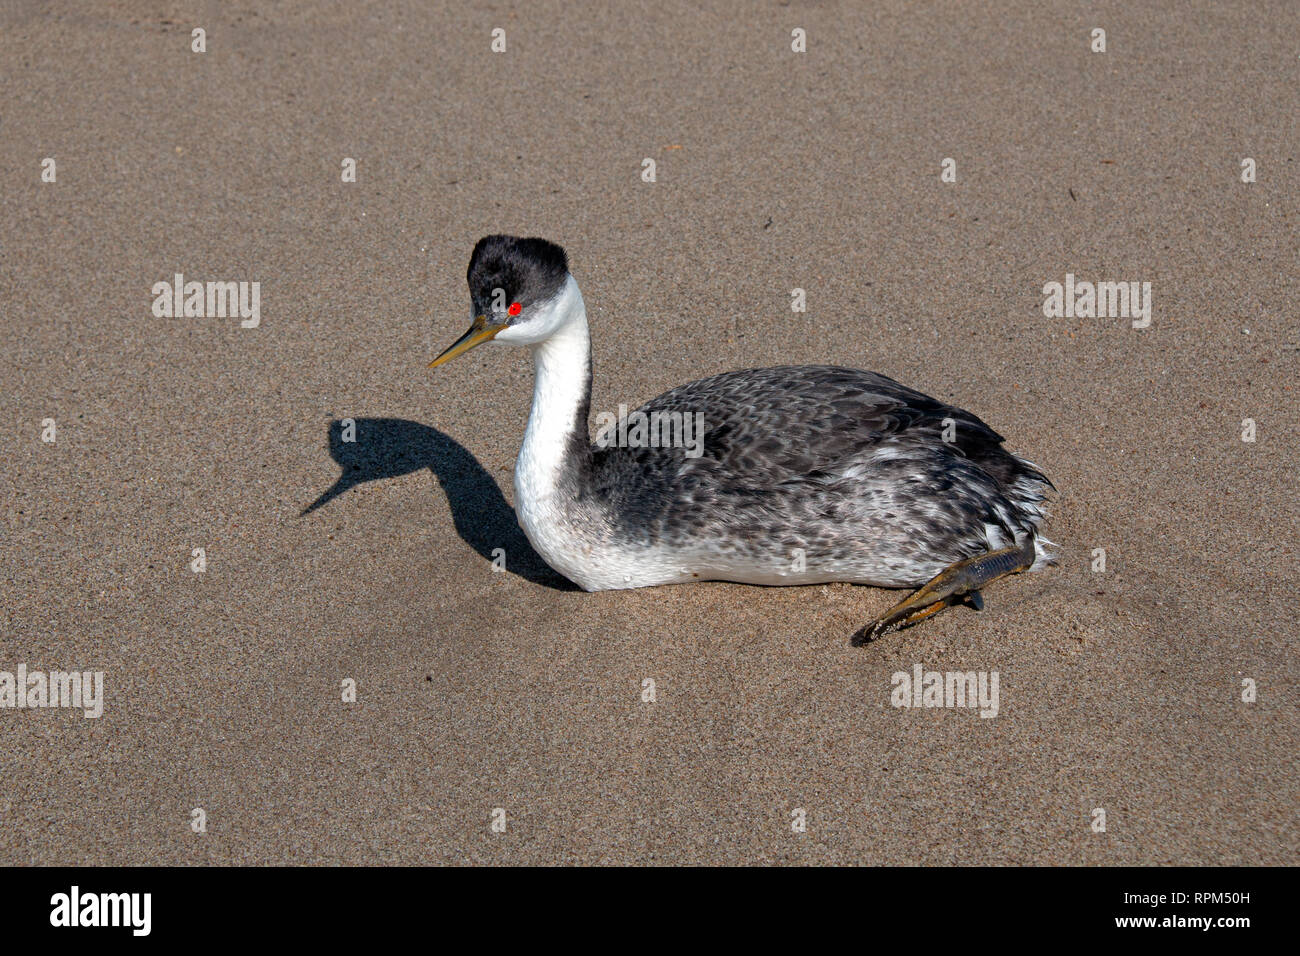 Western grebe [aechmophorus occidentalis] and shadow on Surfers Knoll beach at McGrath State Park in Ventura California United States Stock Photo